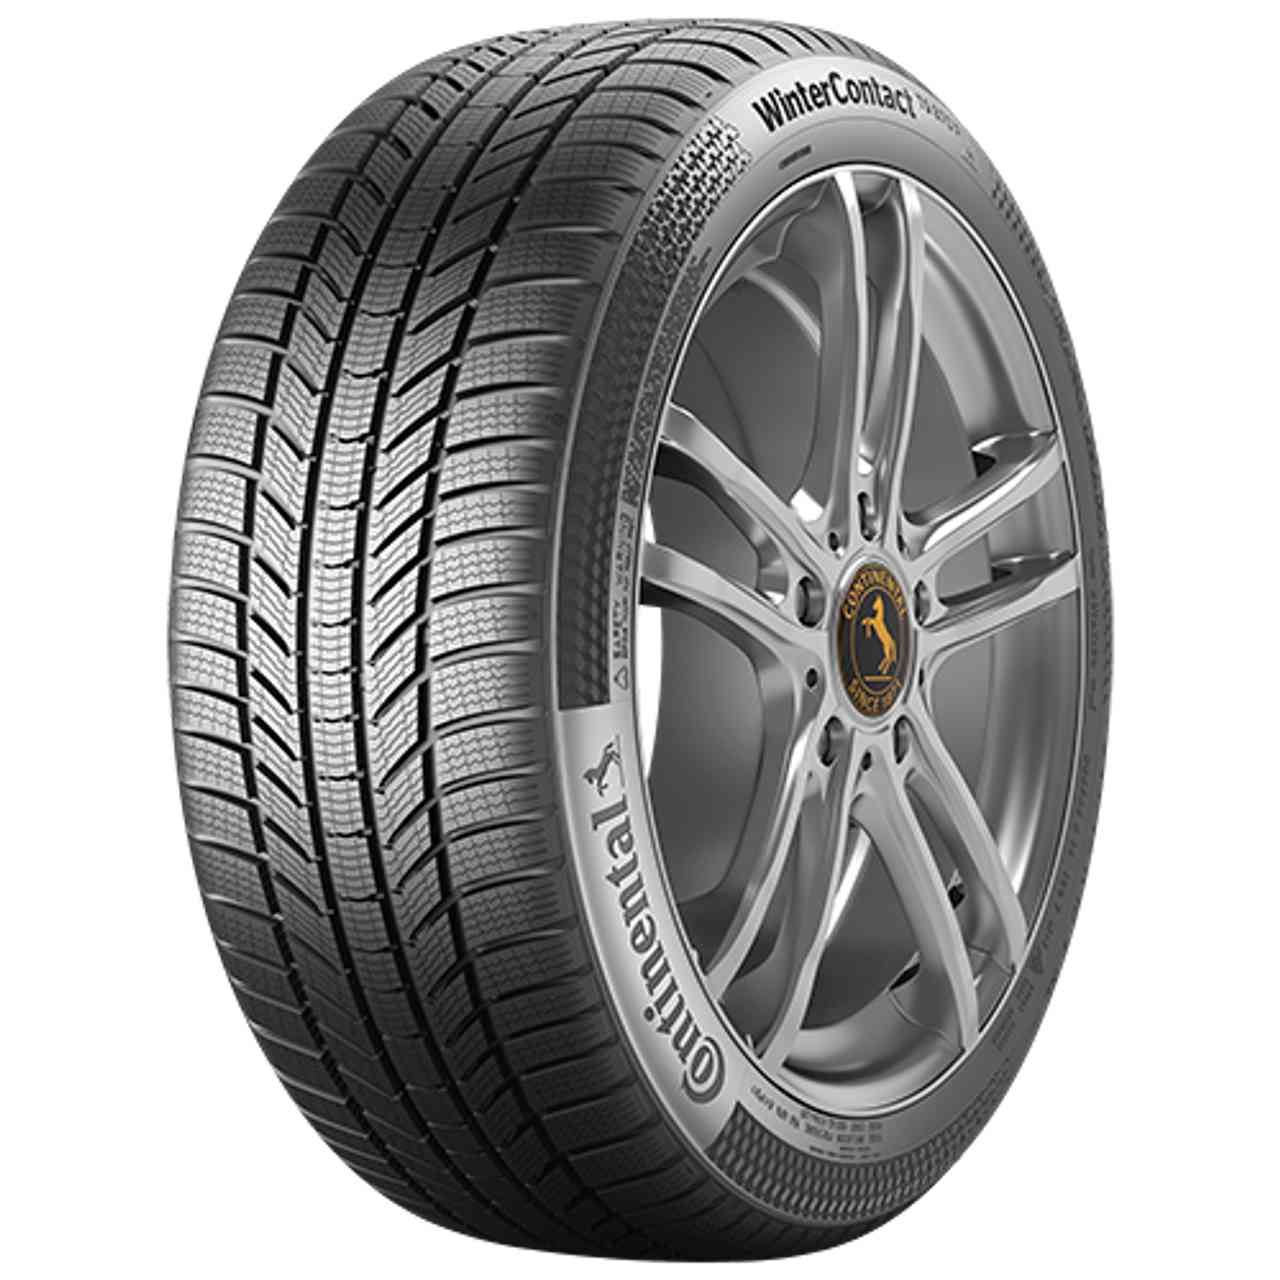 CONTINENTAL WINTERCONTACT TS 870 P (EVc) 255/45R20 101T FR BSW